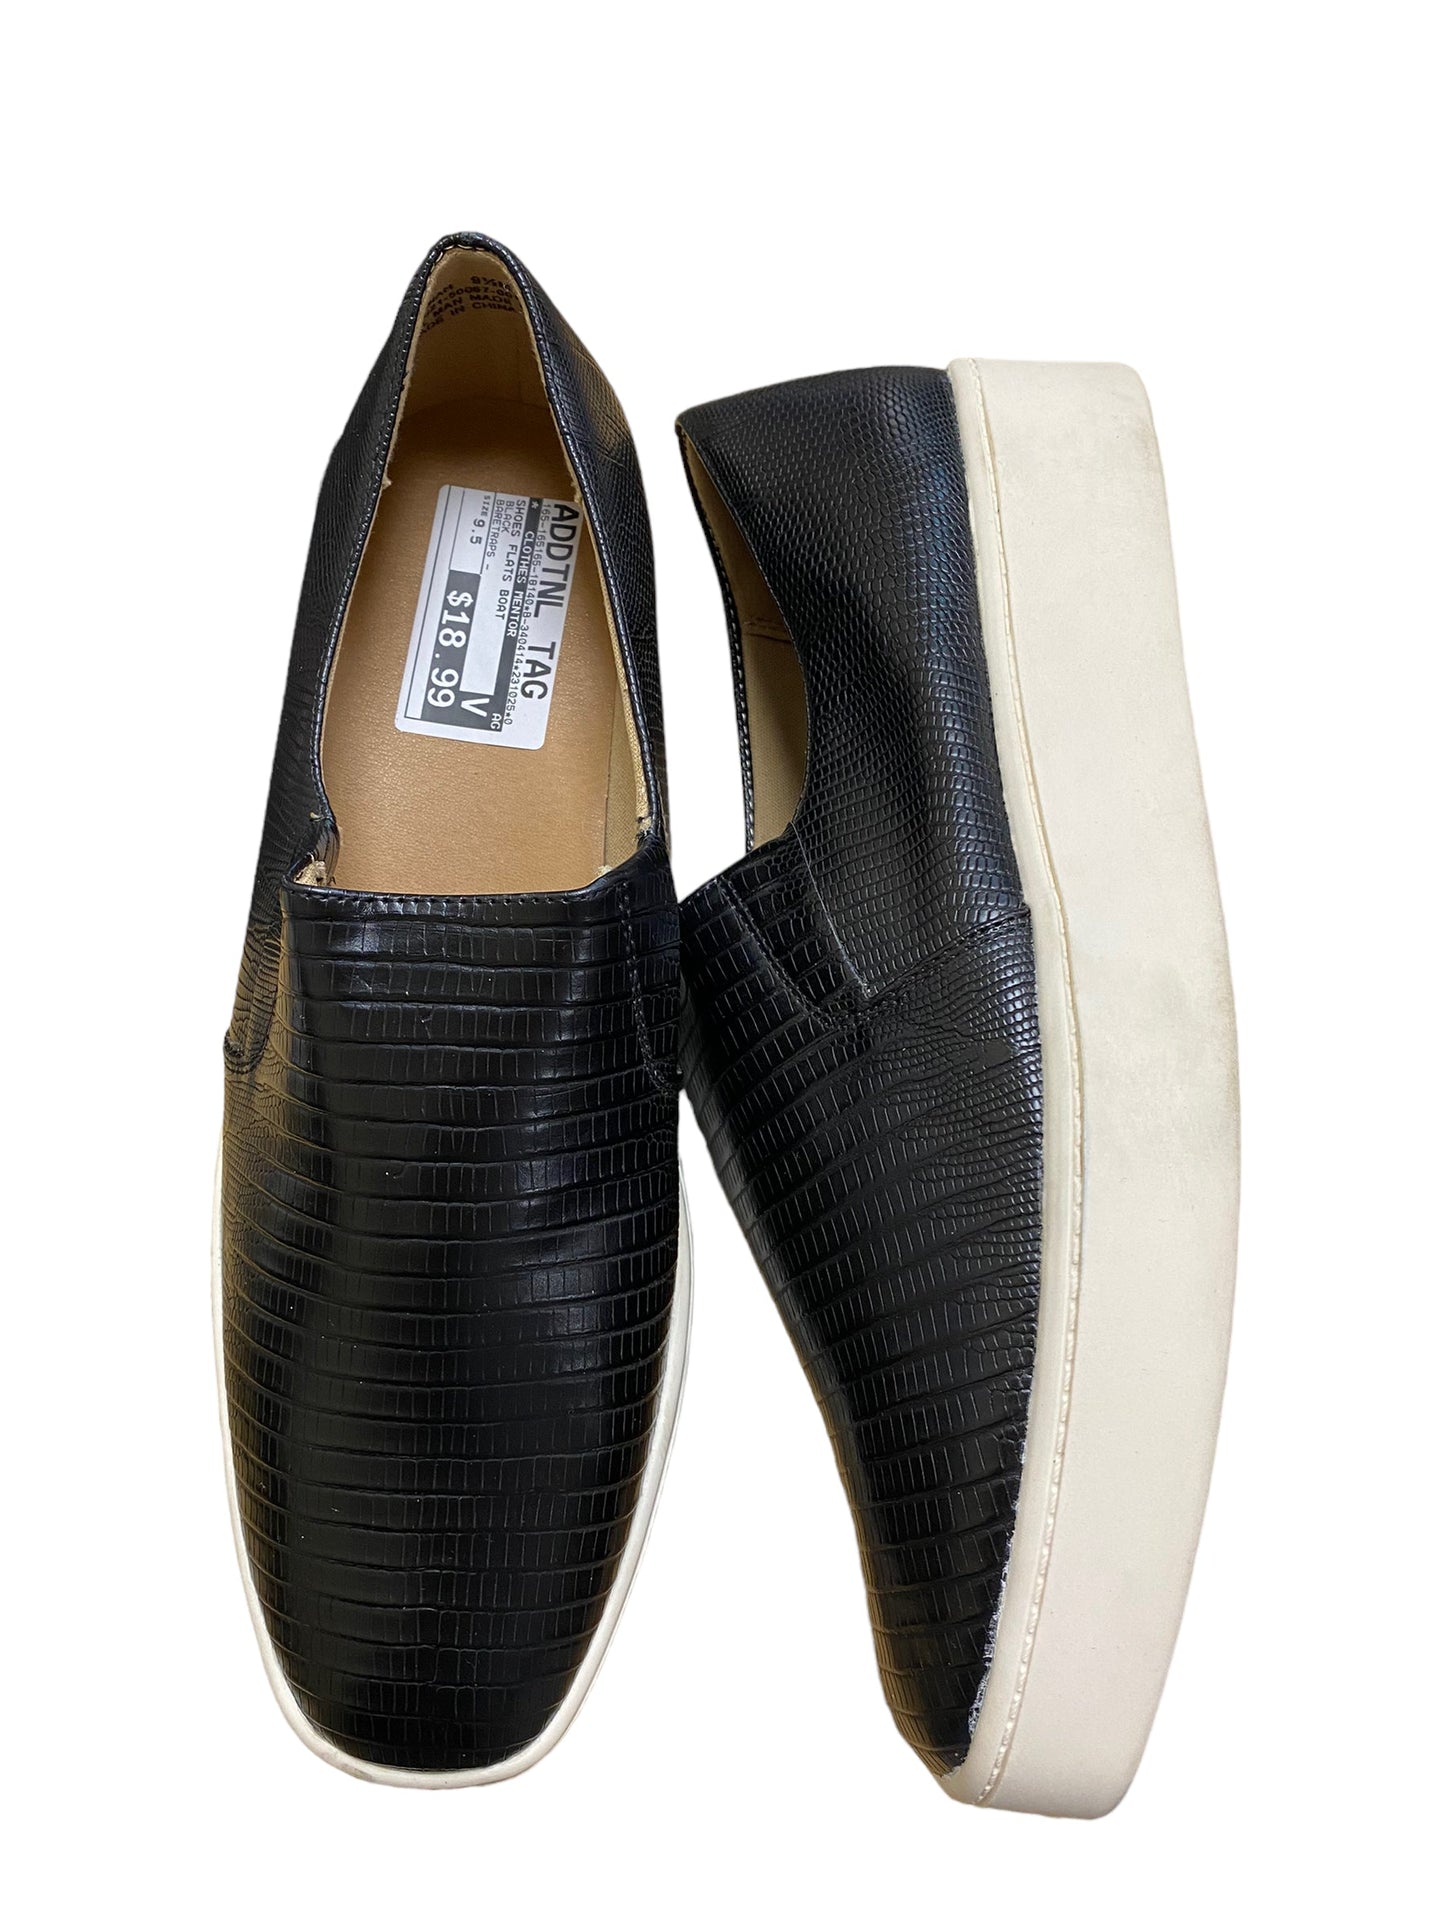 Shoes Flats Boat By Clothes Mentor  Size: 9.5